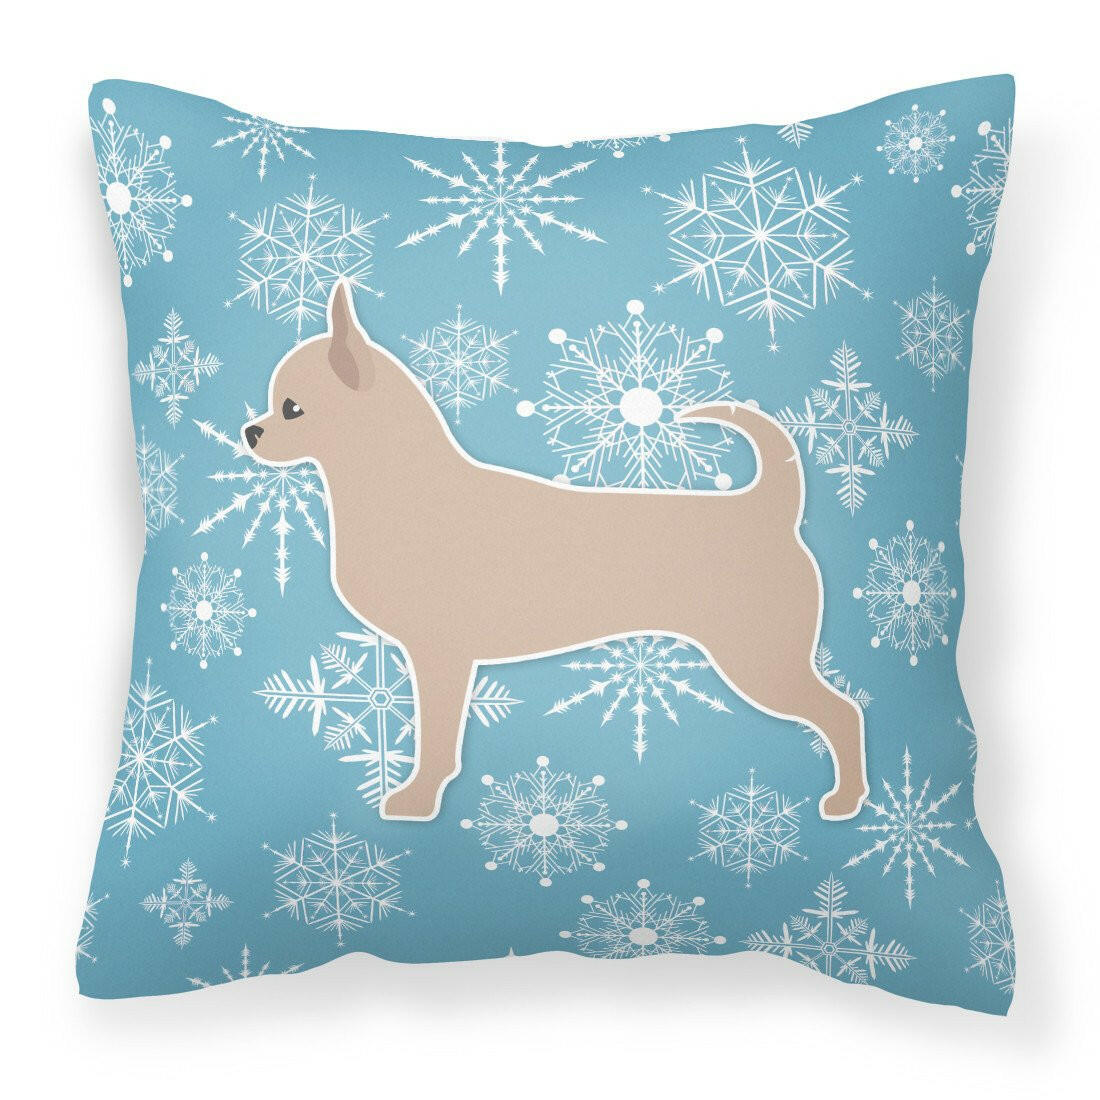 Winter Snowflake Chihuahua Fabric Decorative Pillow BB3550PW1818 by Caroline's Treasures